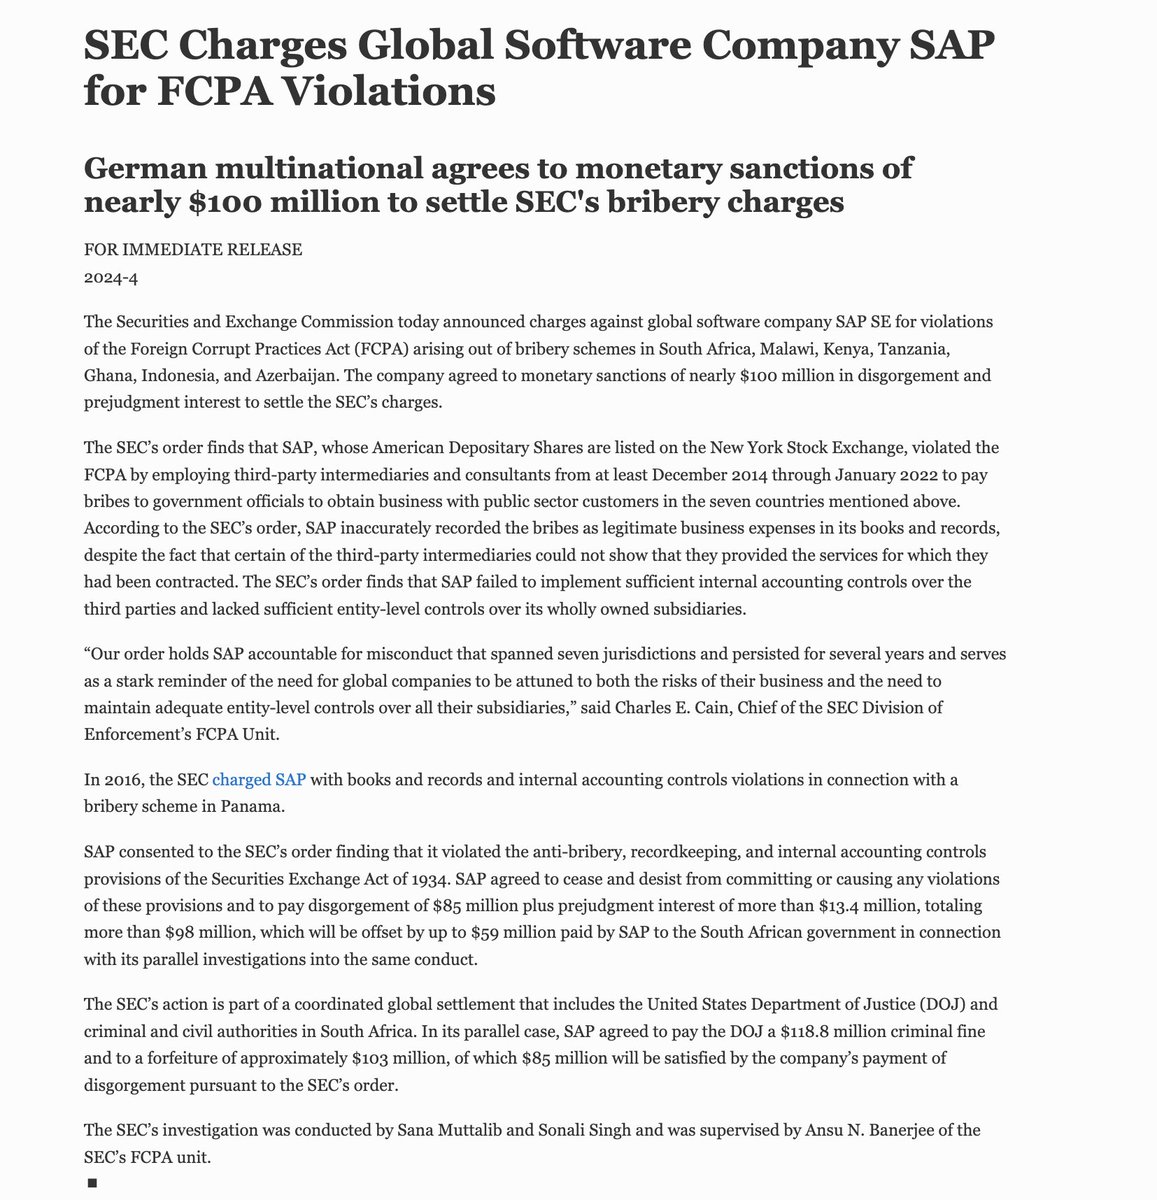 German Software giant SAP has agreed to pay ~$100M in fines to settle charges of paying bribes to win business in Kenya, Tanzania, South Africa, Malawi, Ghana, Indonesia & Azerbaijan. From at least Dec 2014 to Jan 2022, SAP was found to have employed third-party